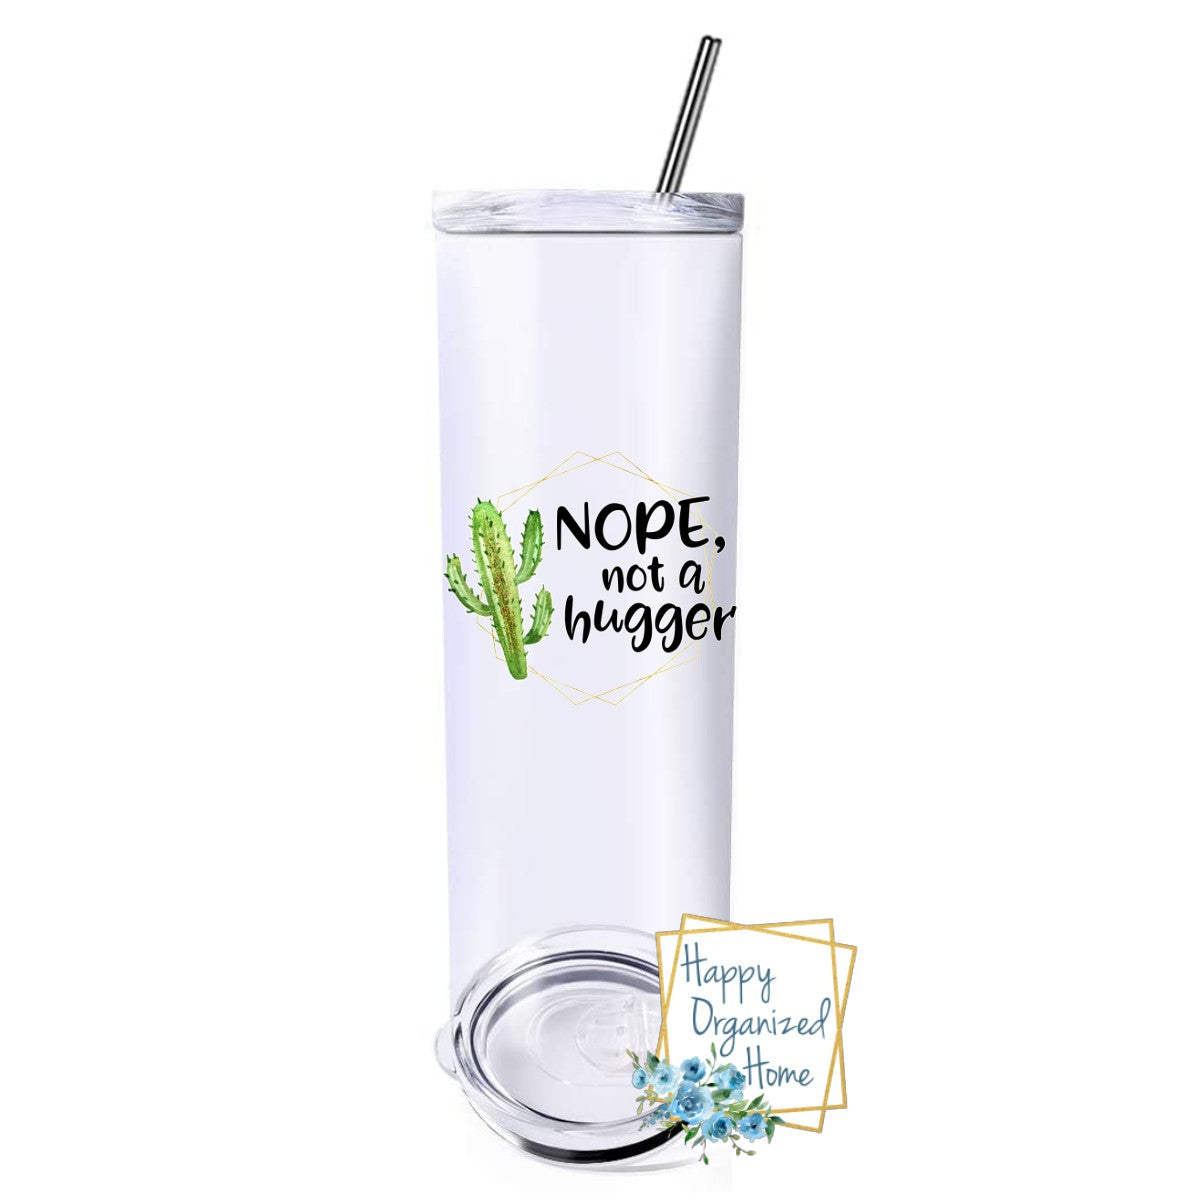 Nope Not a Hugger - Insulated tumbler with metal straw